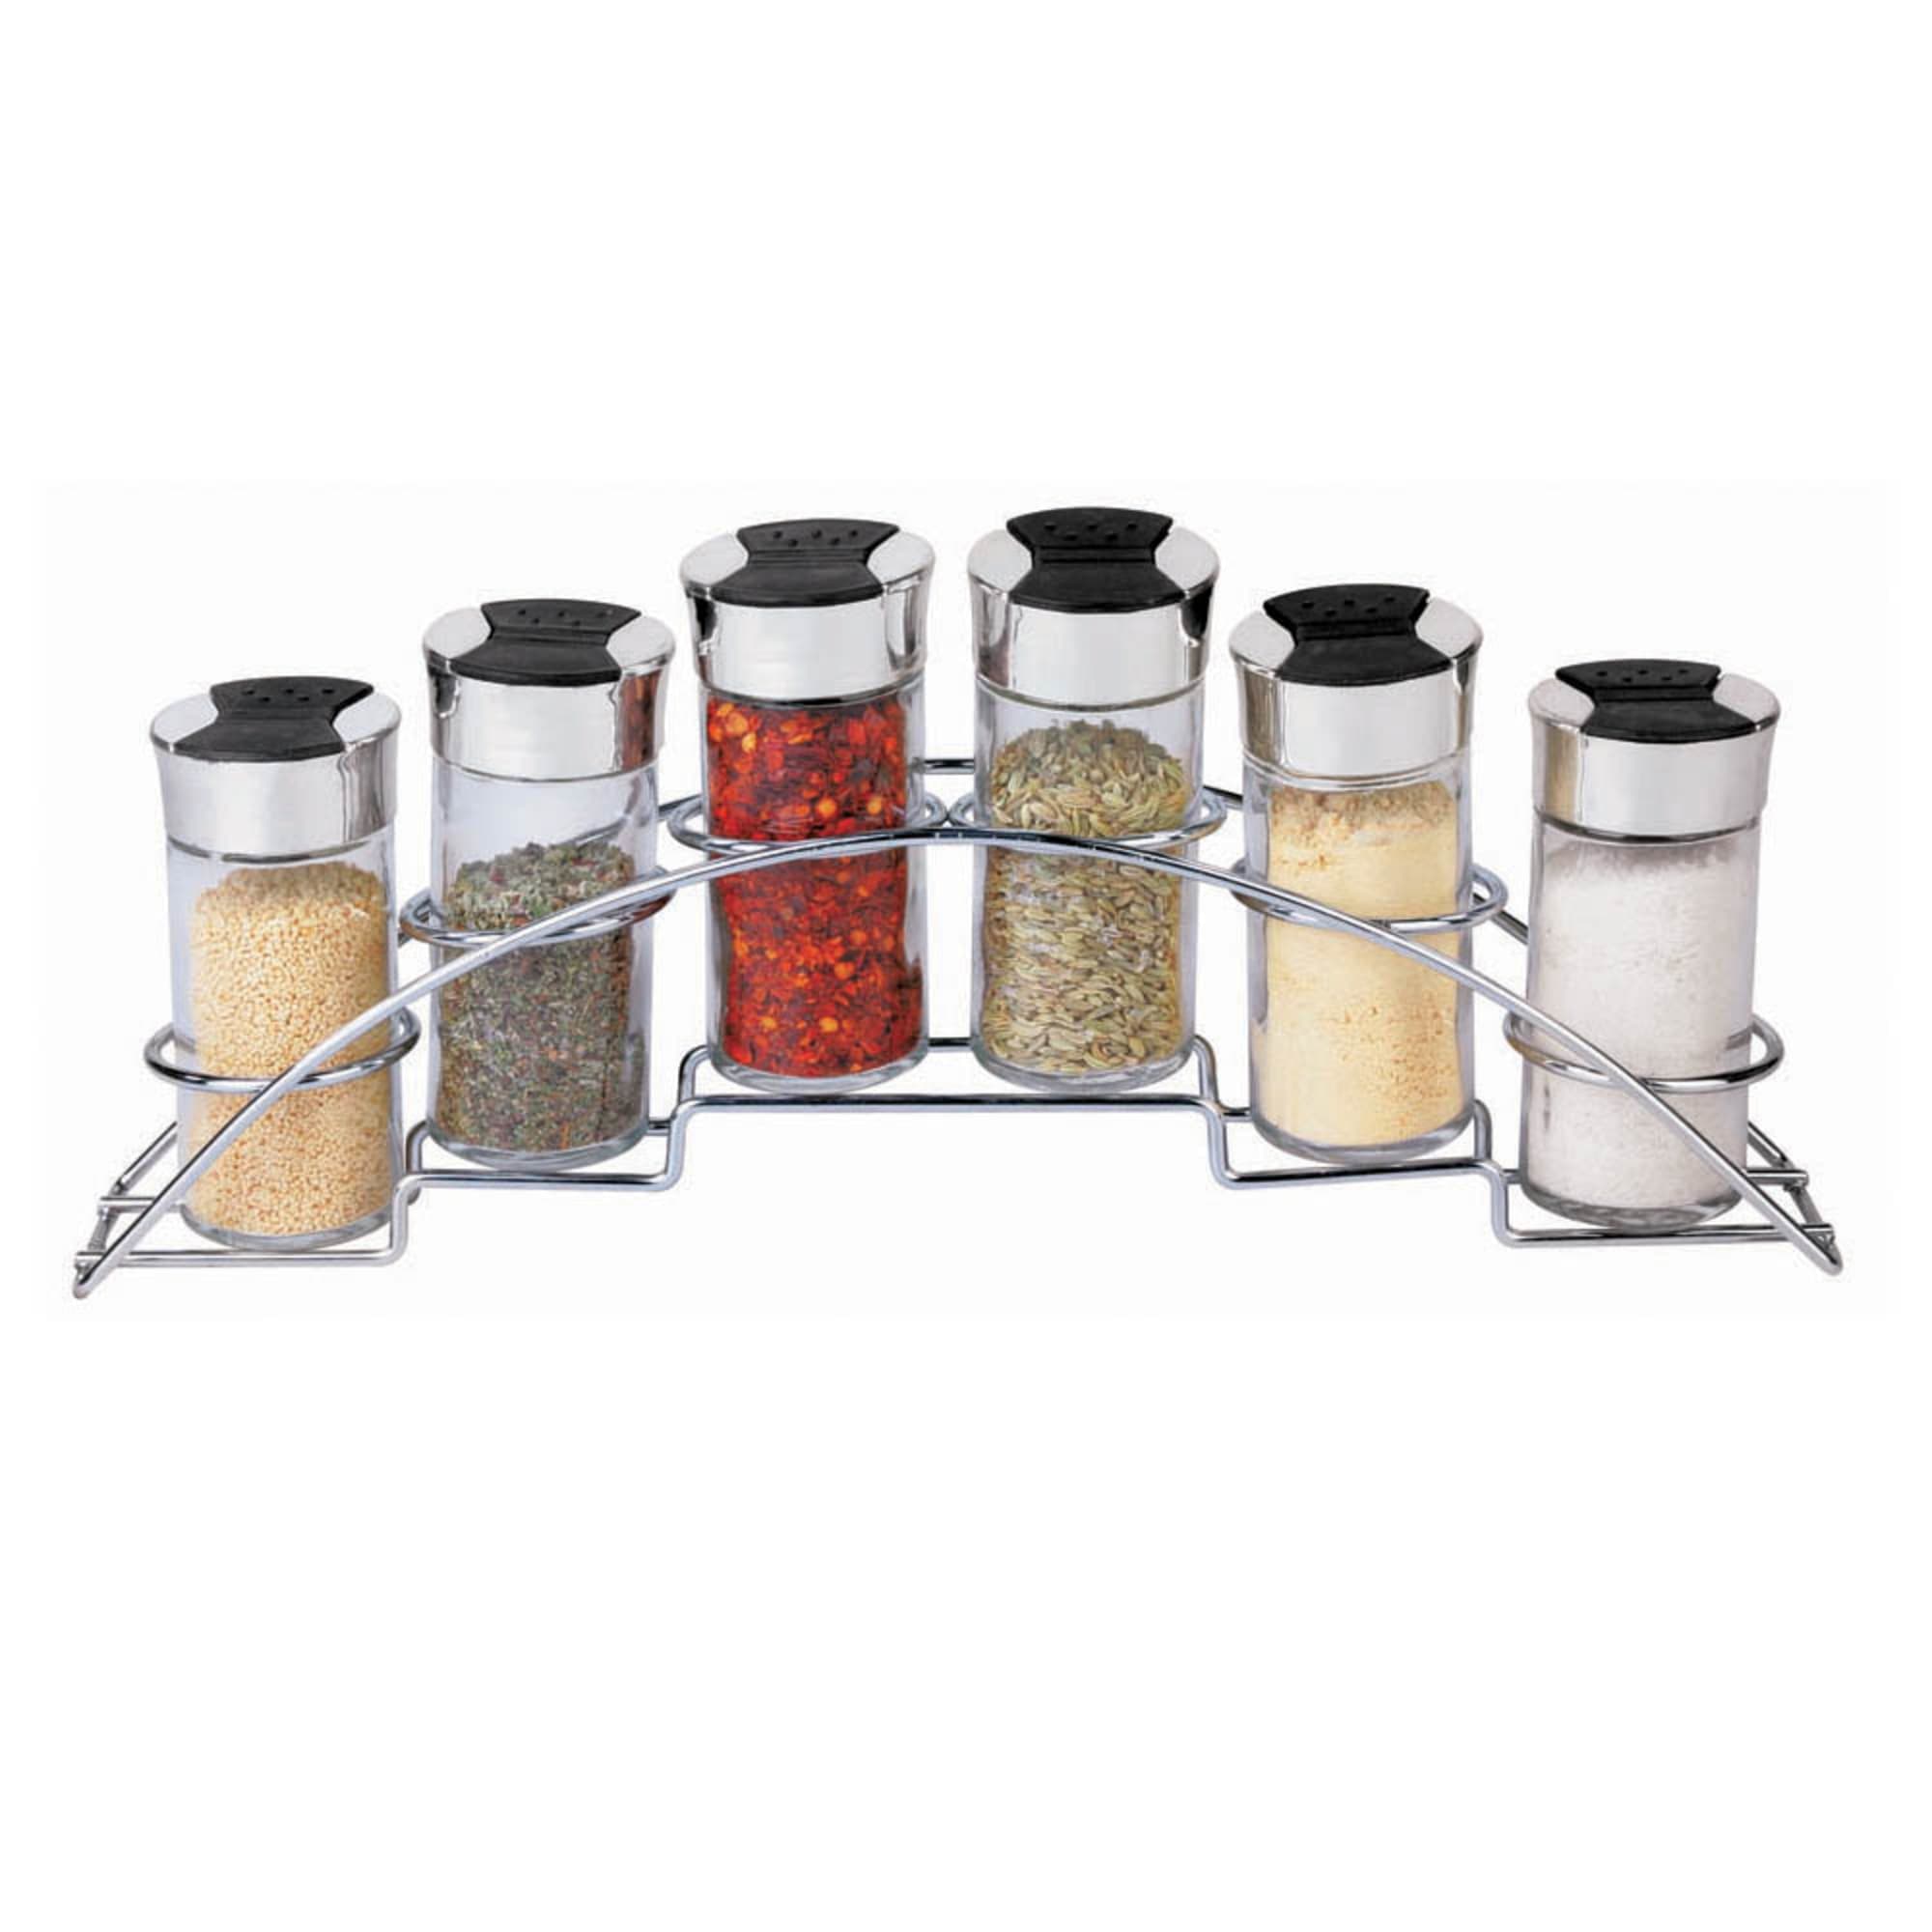 Home Basics Ultra Sleek Half Moon Steel Seasoning and Herbs Organizing Spice Rack with 6 Empty Glass Spice Jars, Chrome $5.00 EACH, CASE PACK OF 12